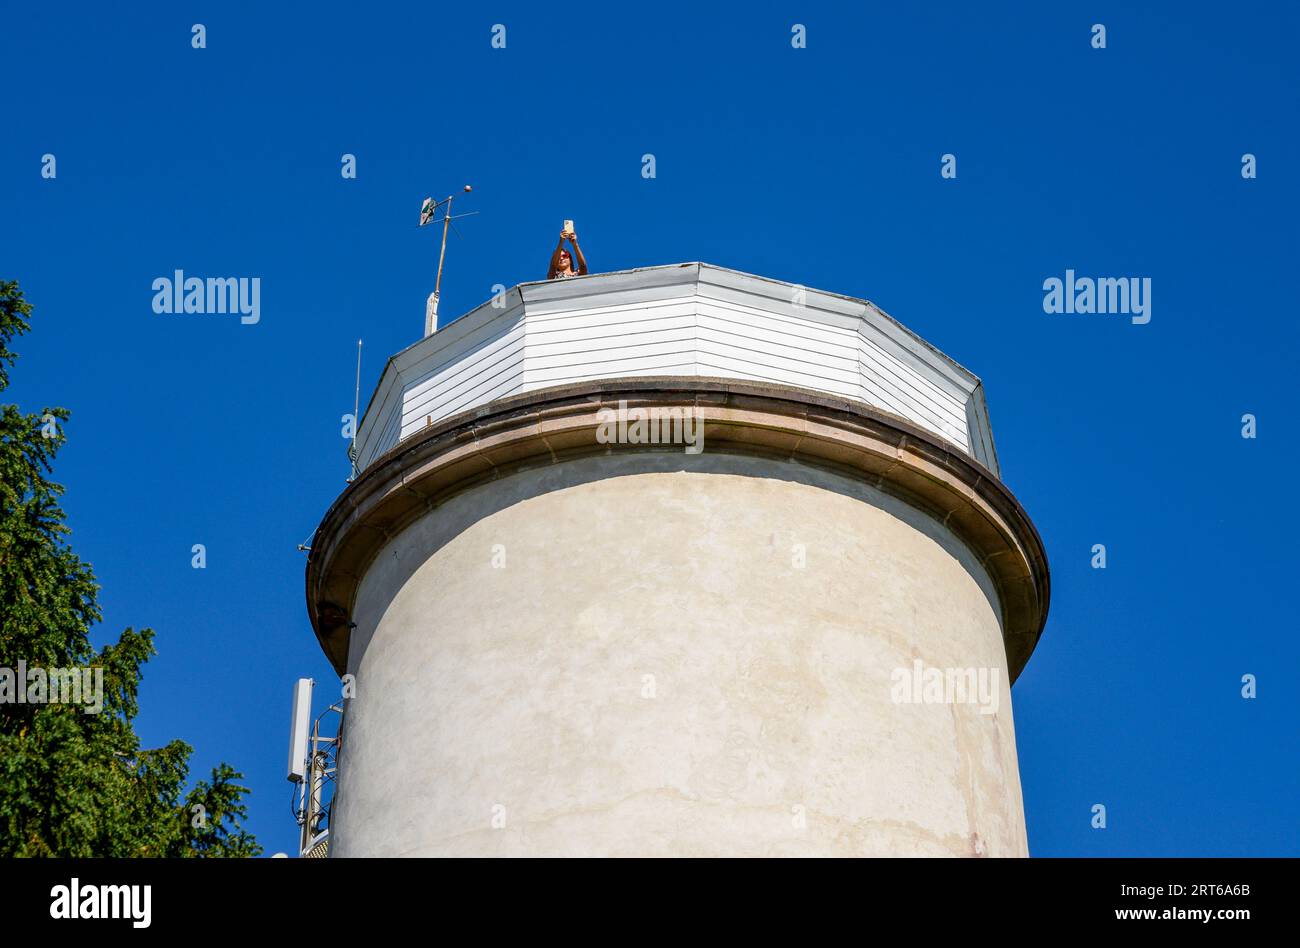 A girl takes photos from the top of the old, decommissioned lighthouse which sits in a forest glade on the narrow Jomfruland island, Telemark, Norway. Stock Photo